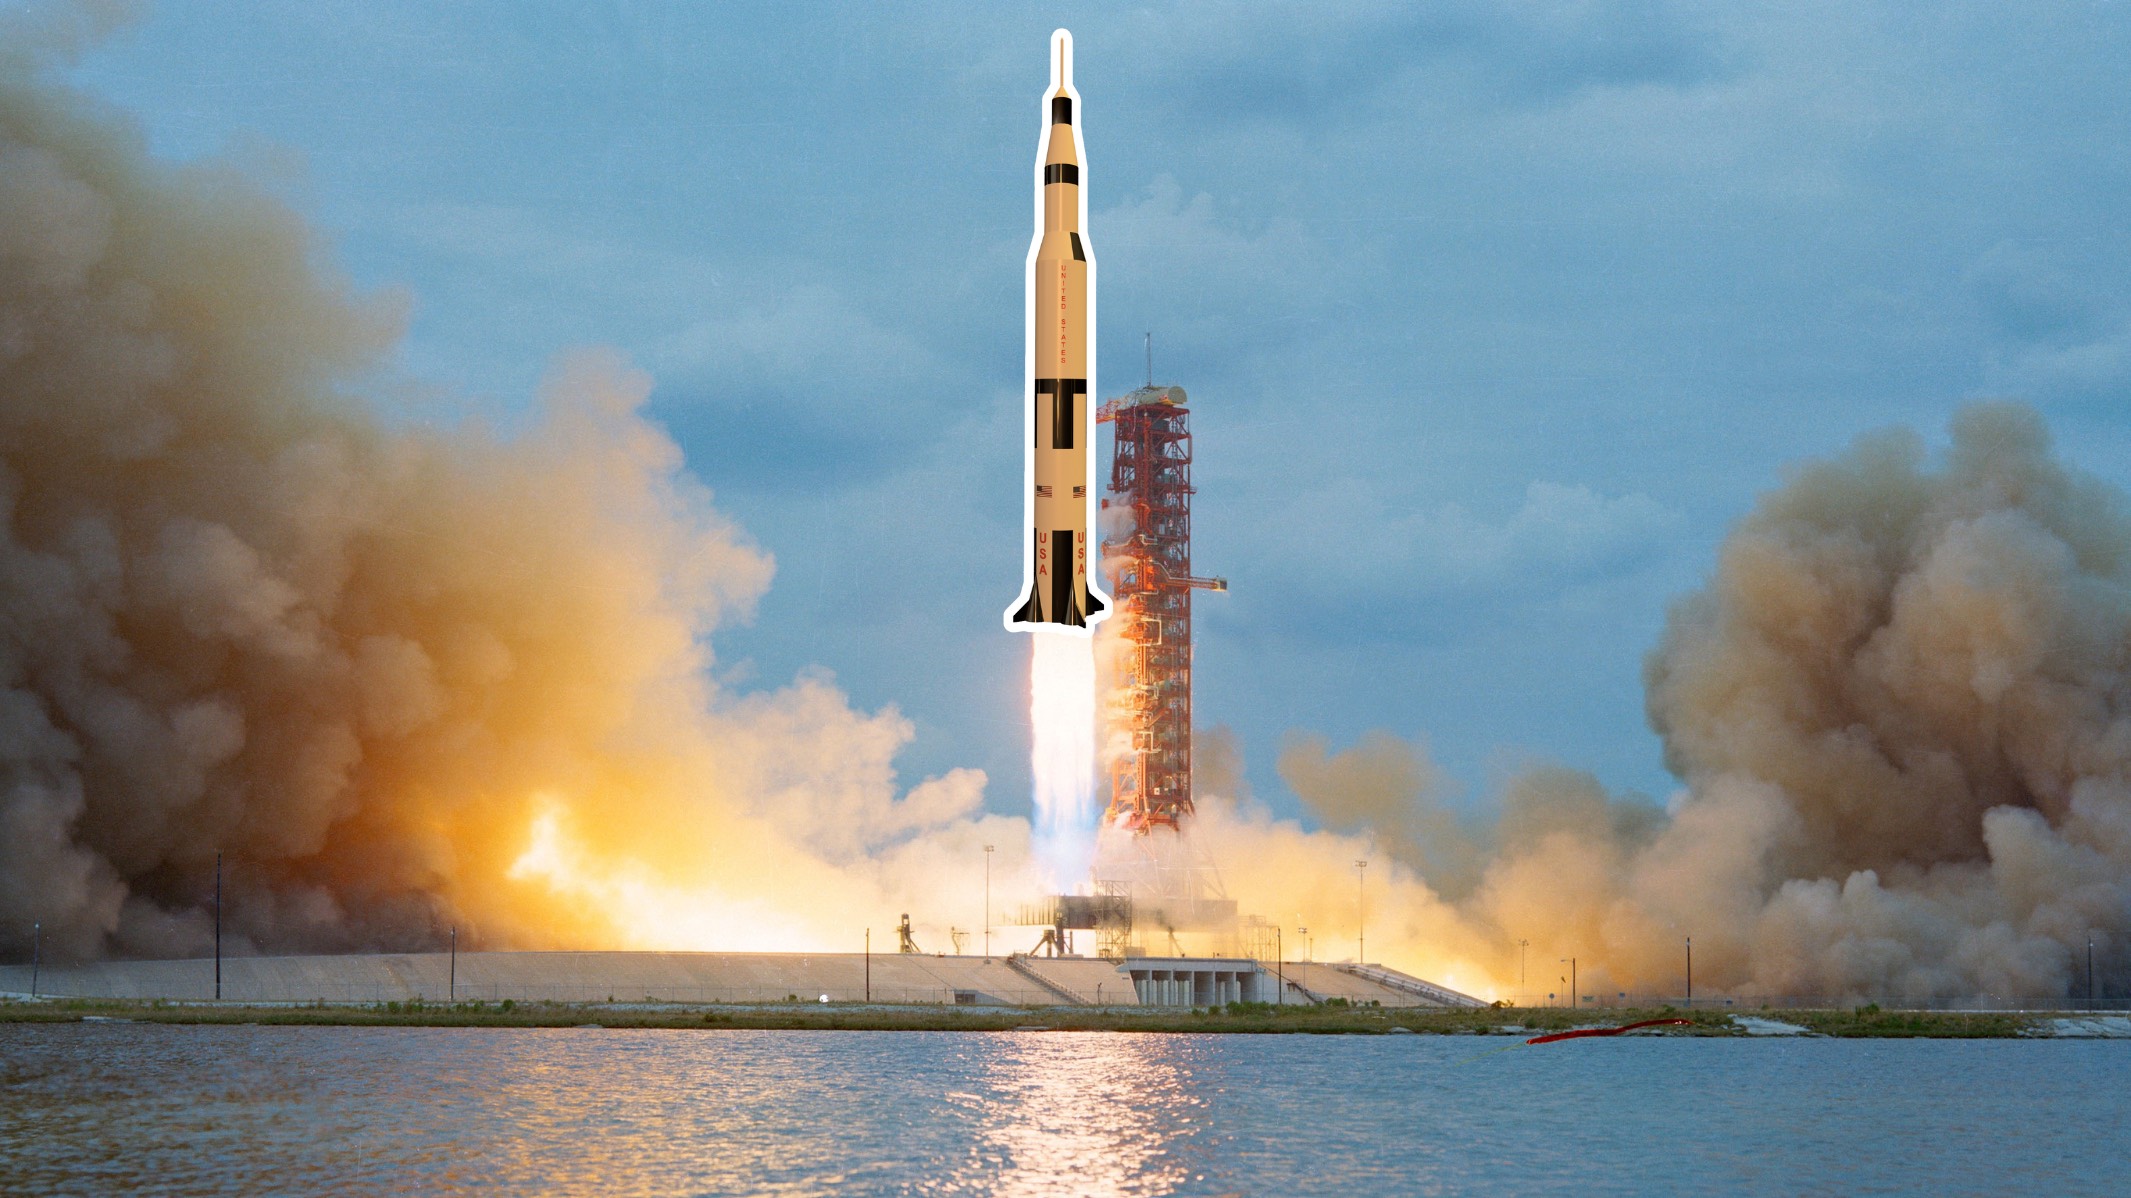 Recreate The Saturn V Rocket in CAD